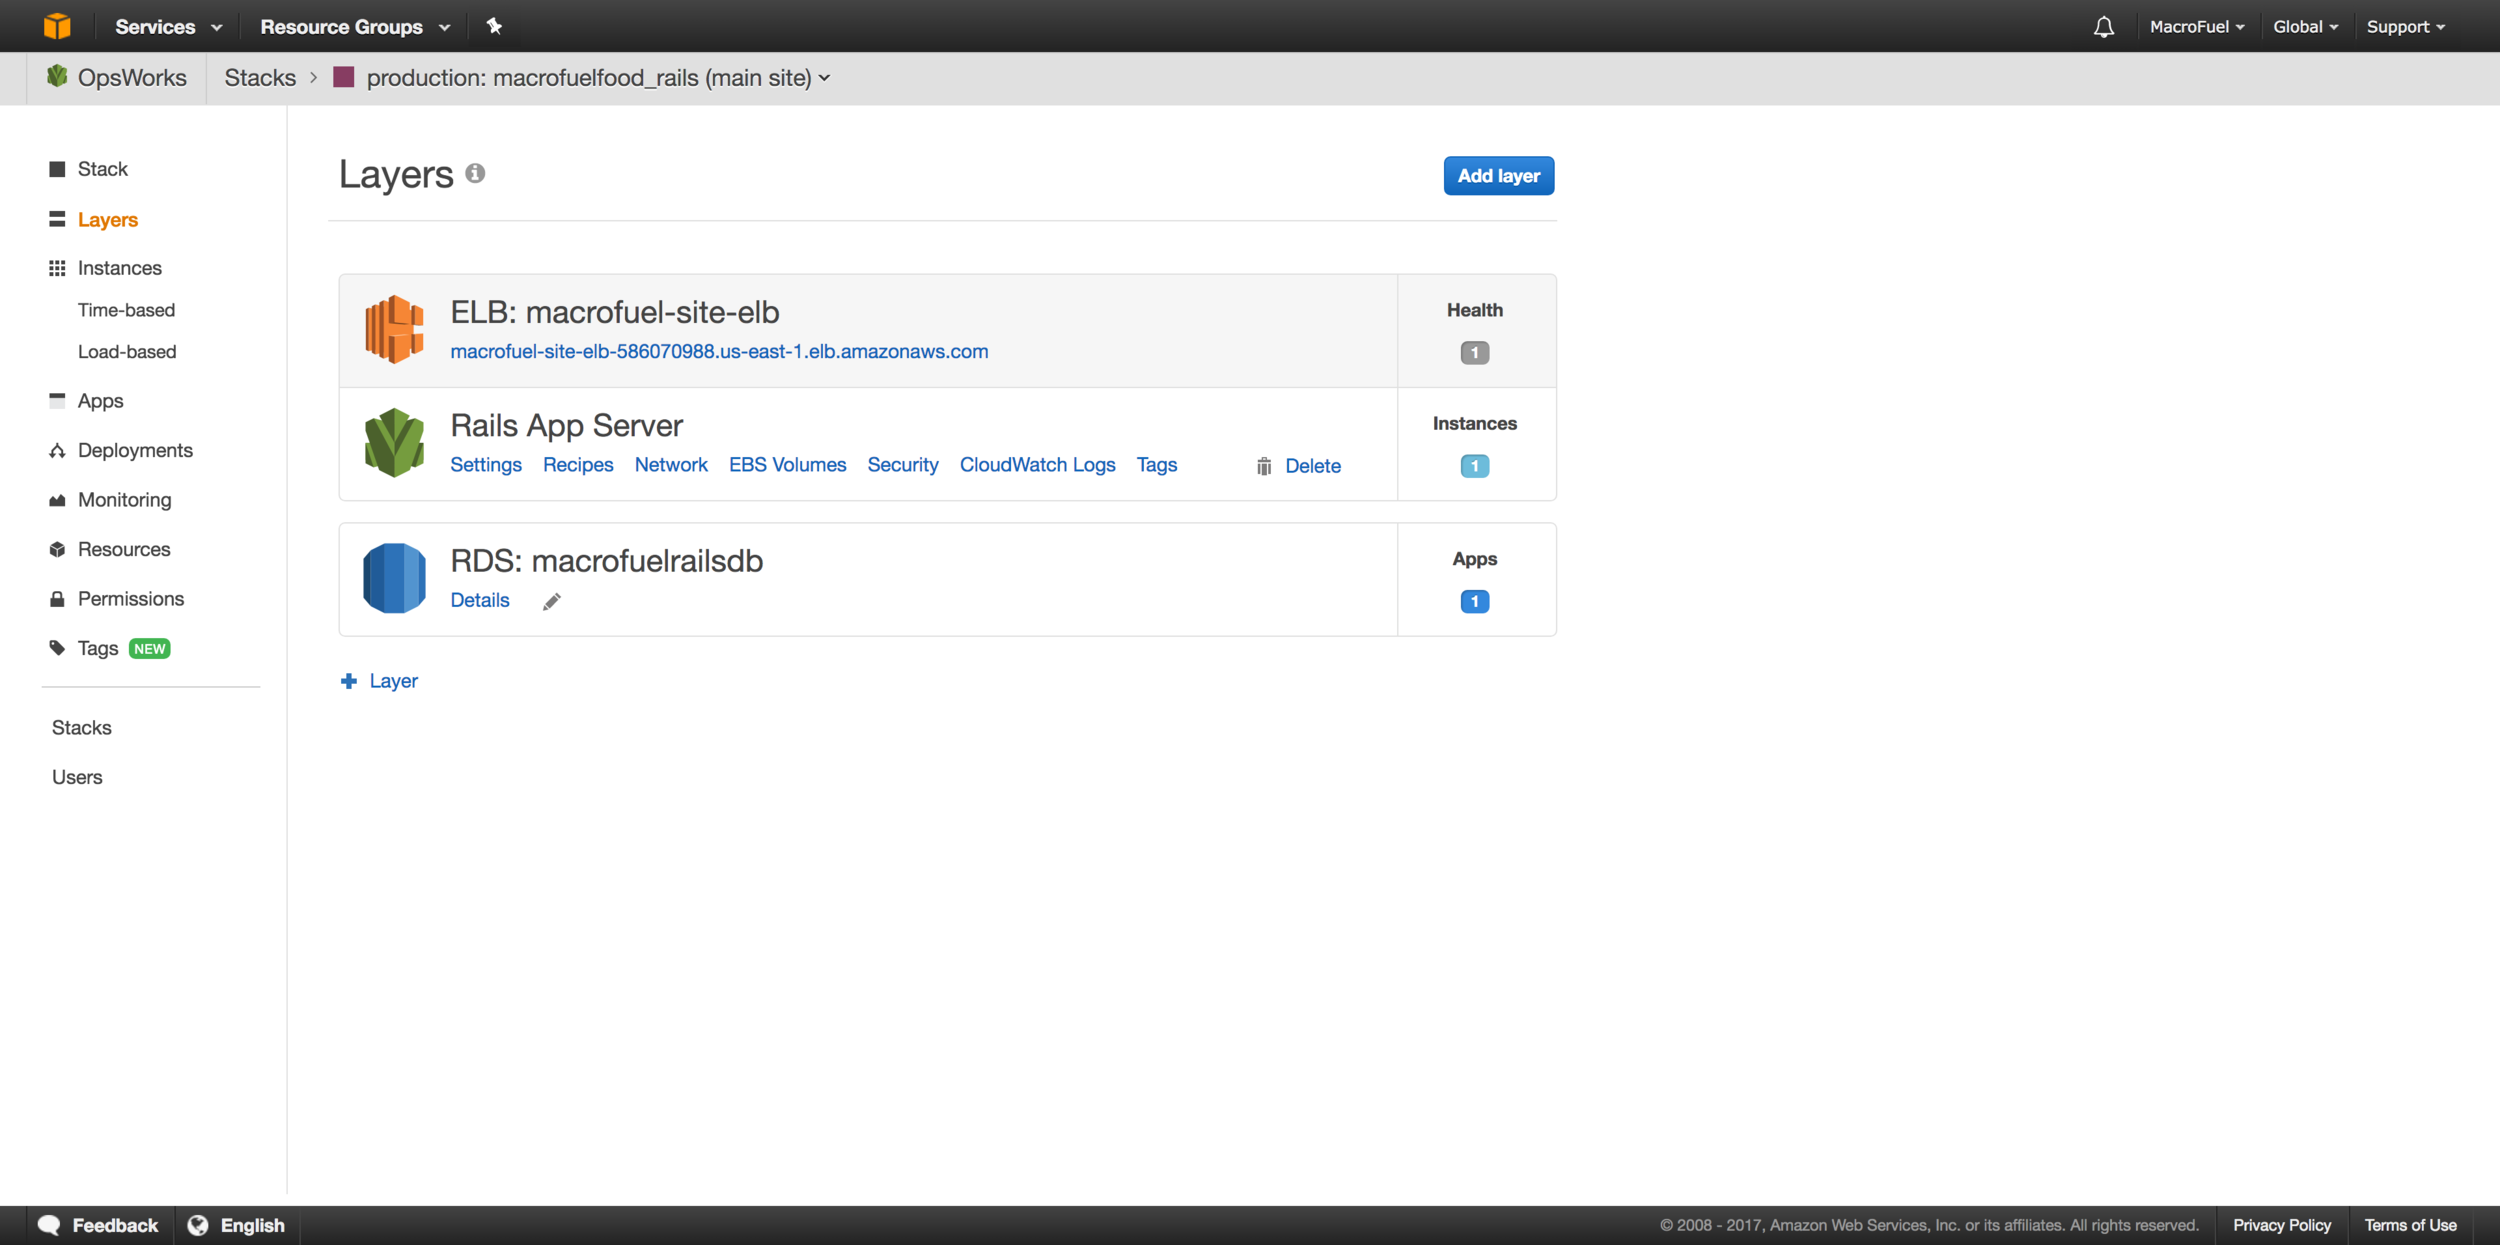 screencapture-console-aws-amazon-opsworks-home-1497410255527.png